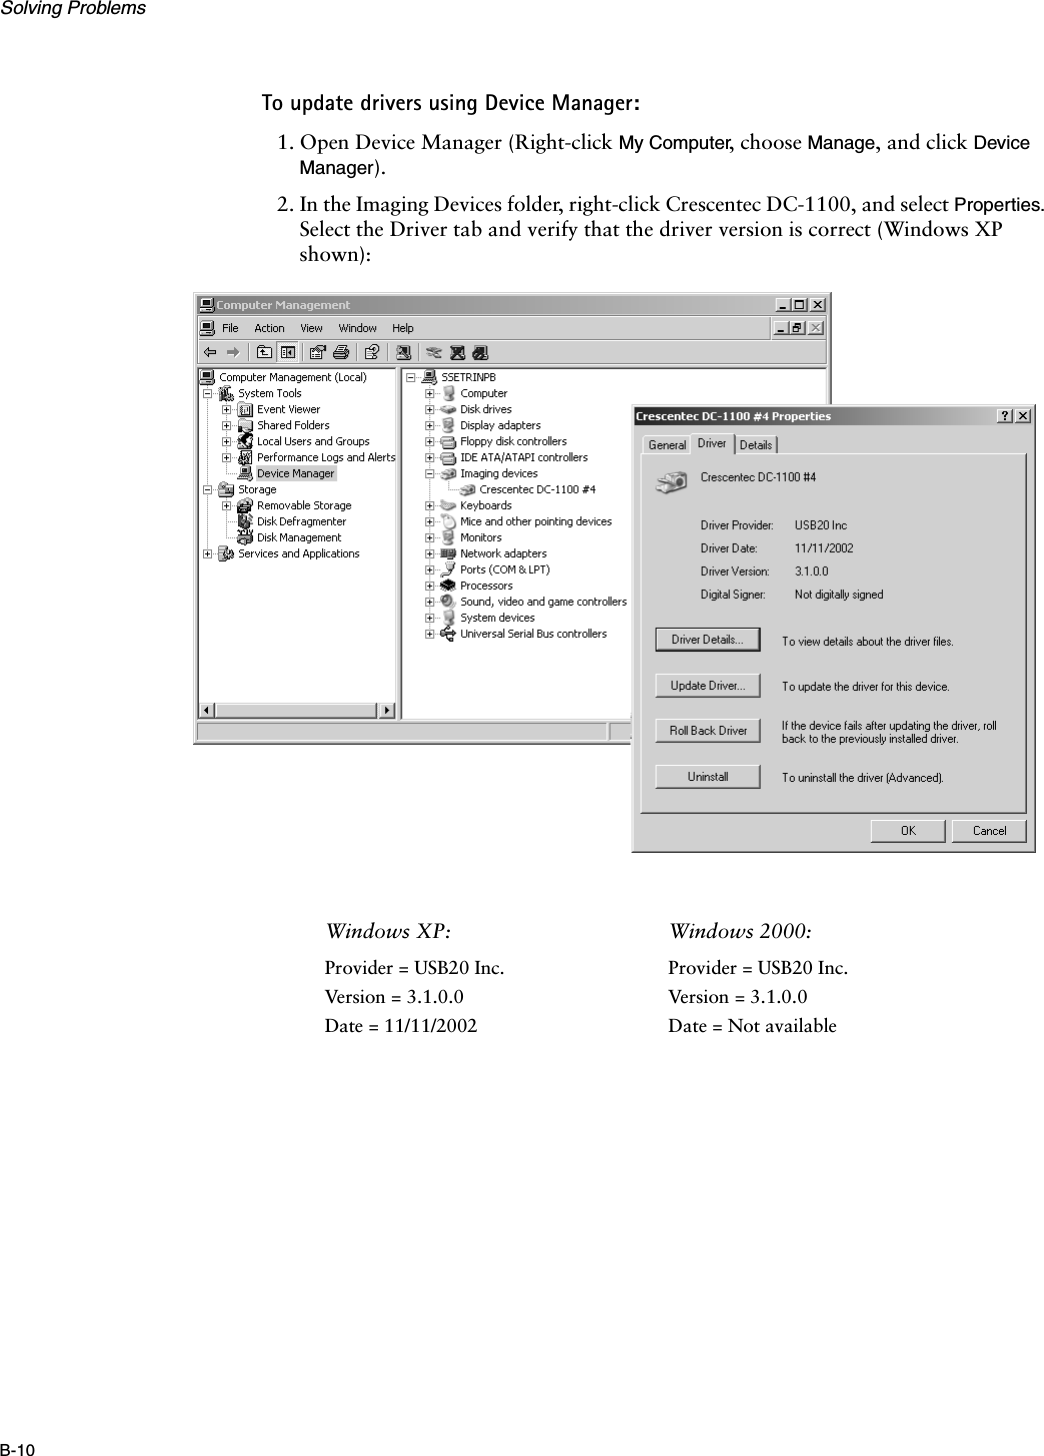 Solving ProblemsB-10To update drivers using Device Manager:1. Open Device Manager (Right-click My Computer, choose Manage, and click Device Manager).2. In the Imaging Devices folder, right-click Crescentec DC-1100, and select Properties. Select the Driver tab and verify that the driver version is correct (Windows XP shown):Windows XP:  Windows 2000:Provider = USB20 Inc.Version = 3.1.0.0Date = 11/11/2002Provider = USB20 Inc.Version = 3.1.0.0Date = Not available